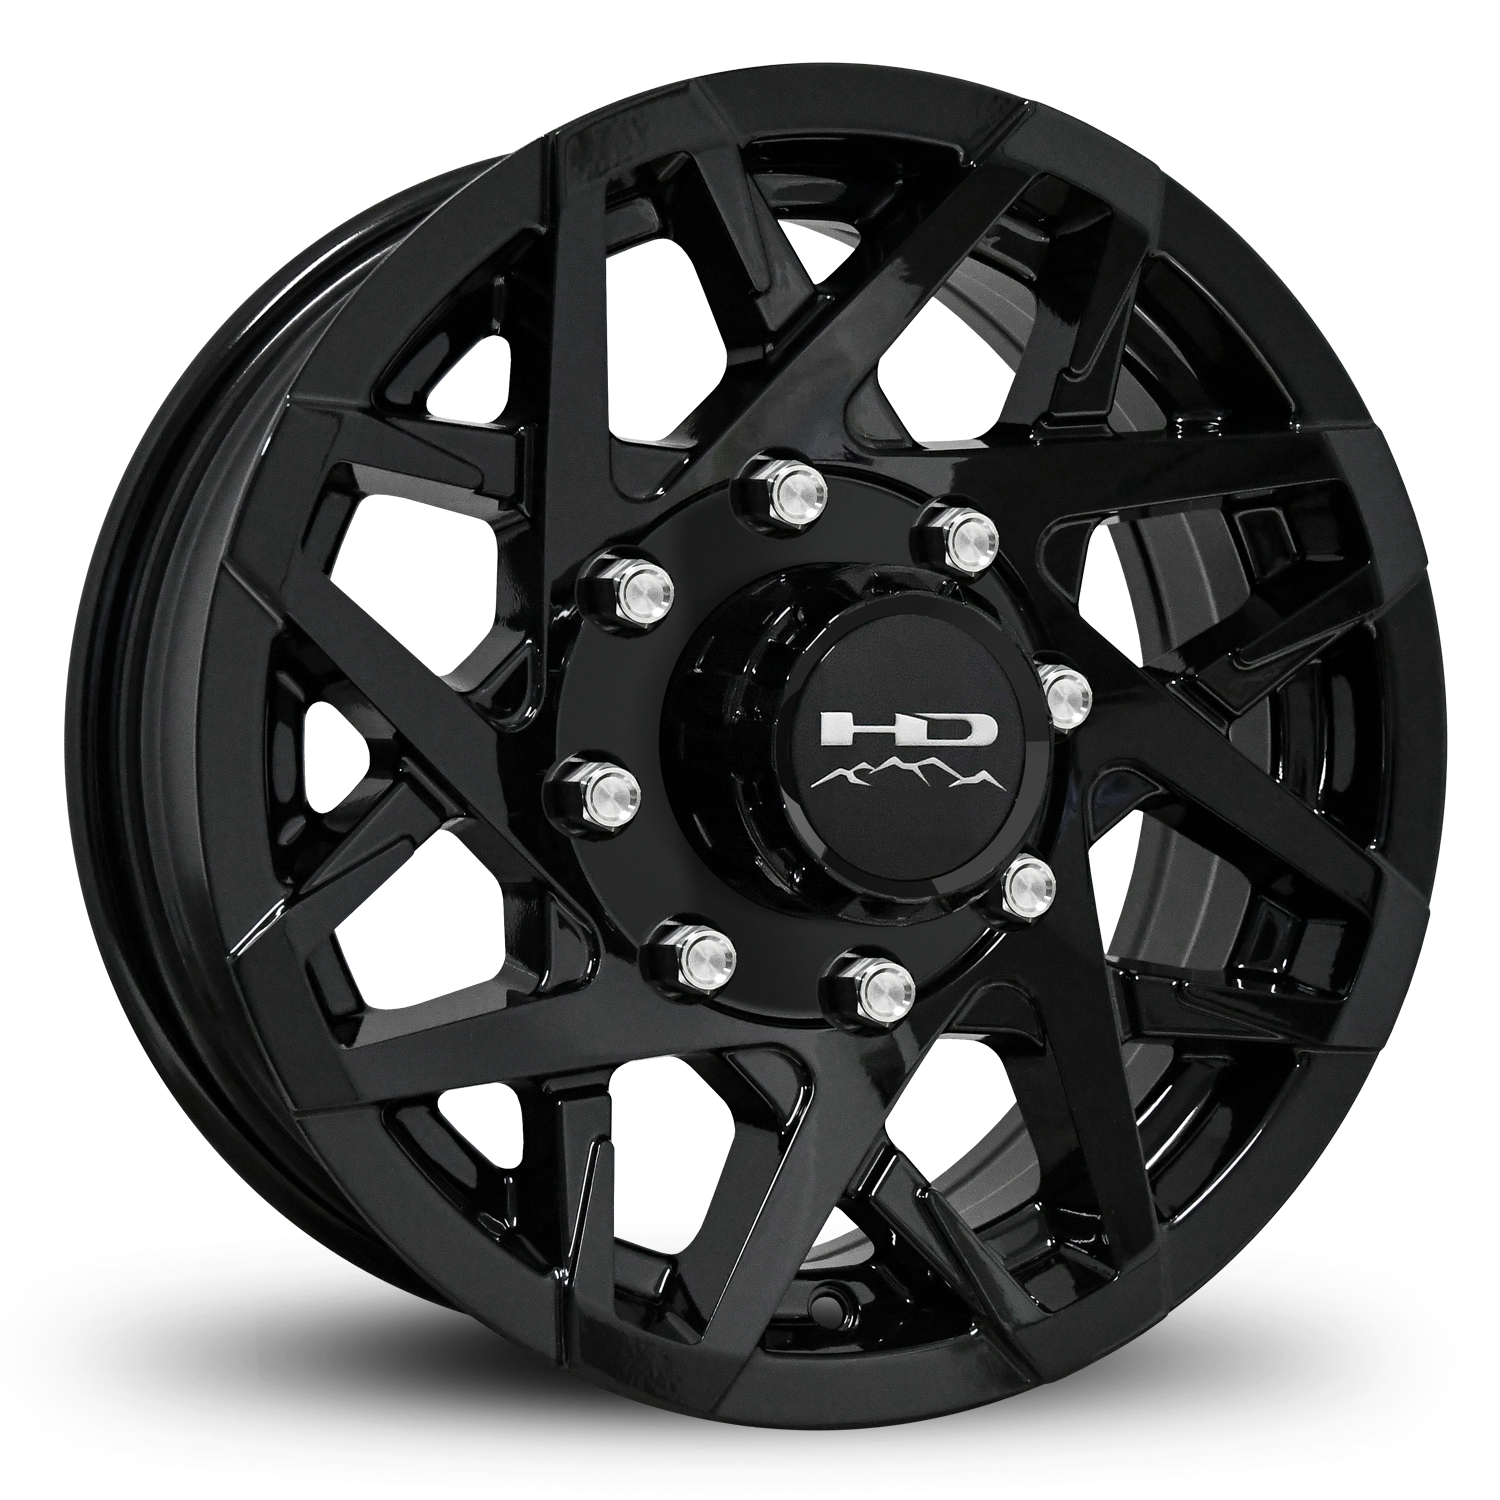 HD Off-Road Canyon Custom Trailer Wheel Rims in 16x6.0 16x6 All Gloss Black with Center Cap & Logo fits 8x6.50 / 8x165 Axle Boat, Car, RV, Travel, Concession, Horse, Utility, Lawn & Garden, & Landscaping.